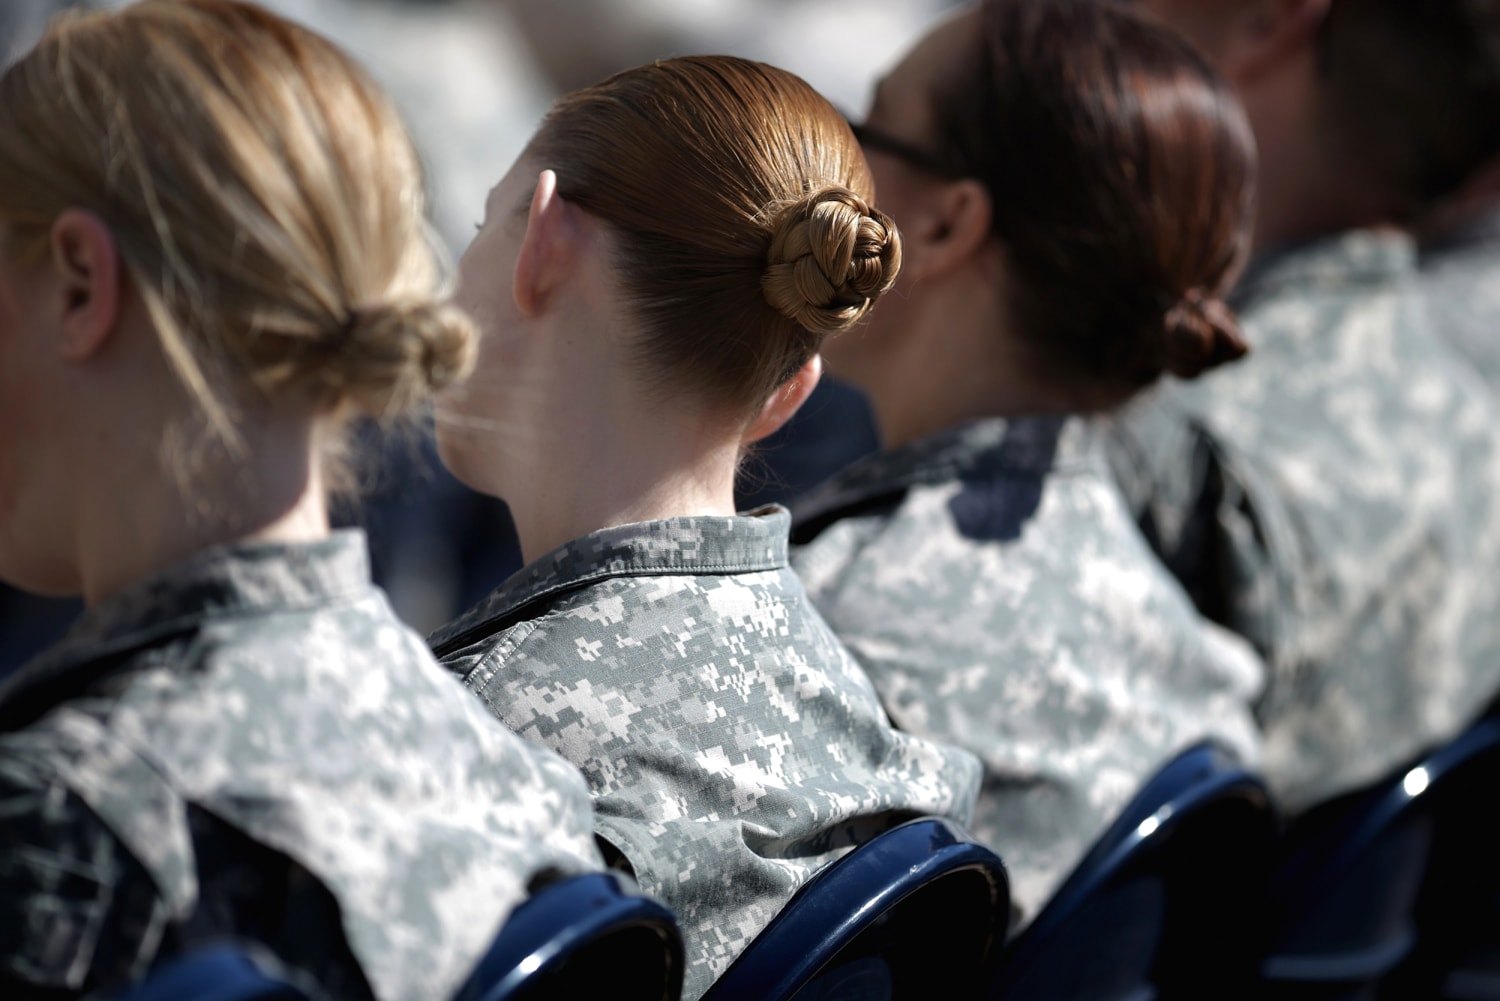 US Army will allow female soldiers to wear ponytails